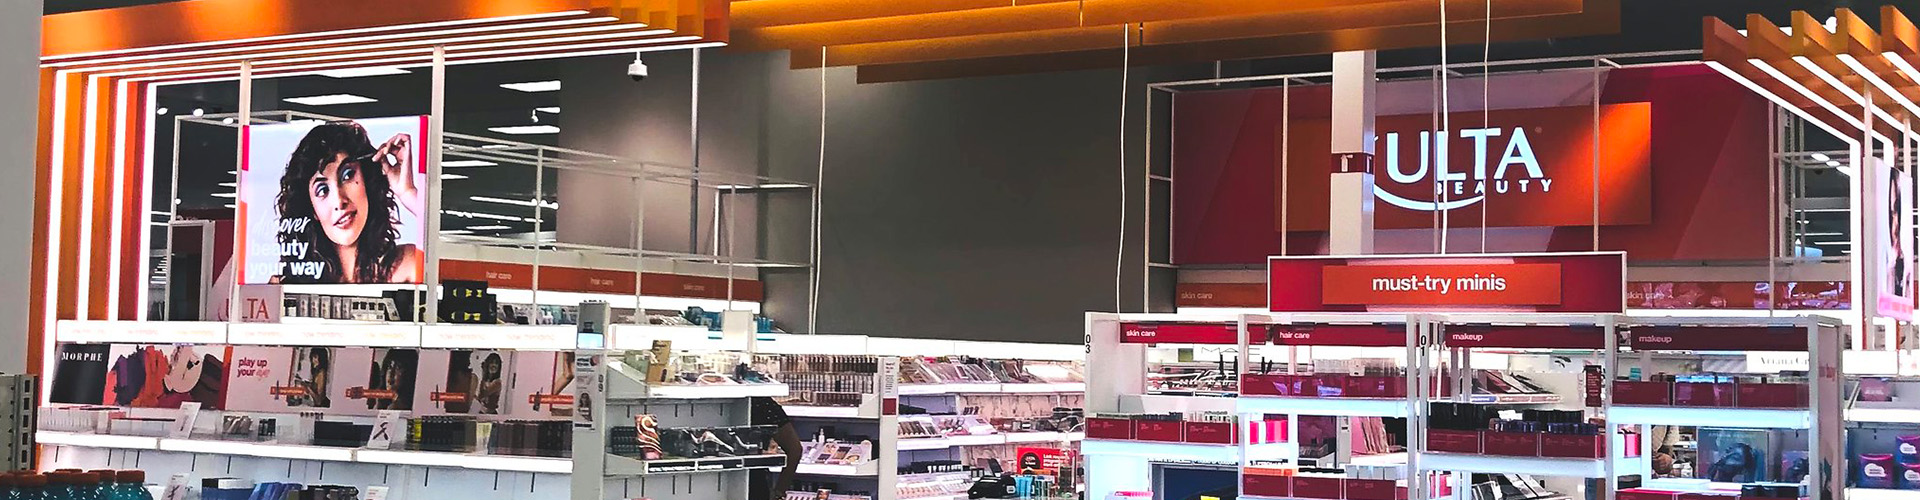 Ulta at Target – Report Banner featuring Ulta section in Target